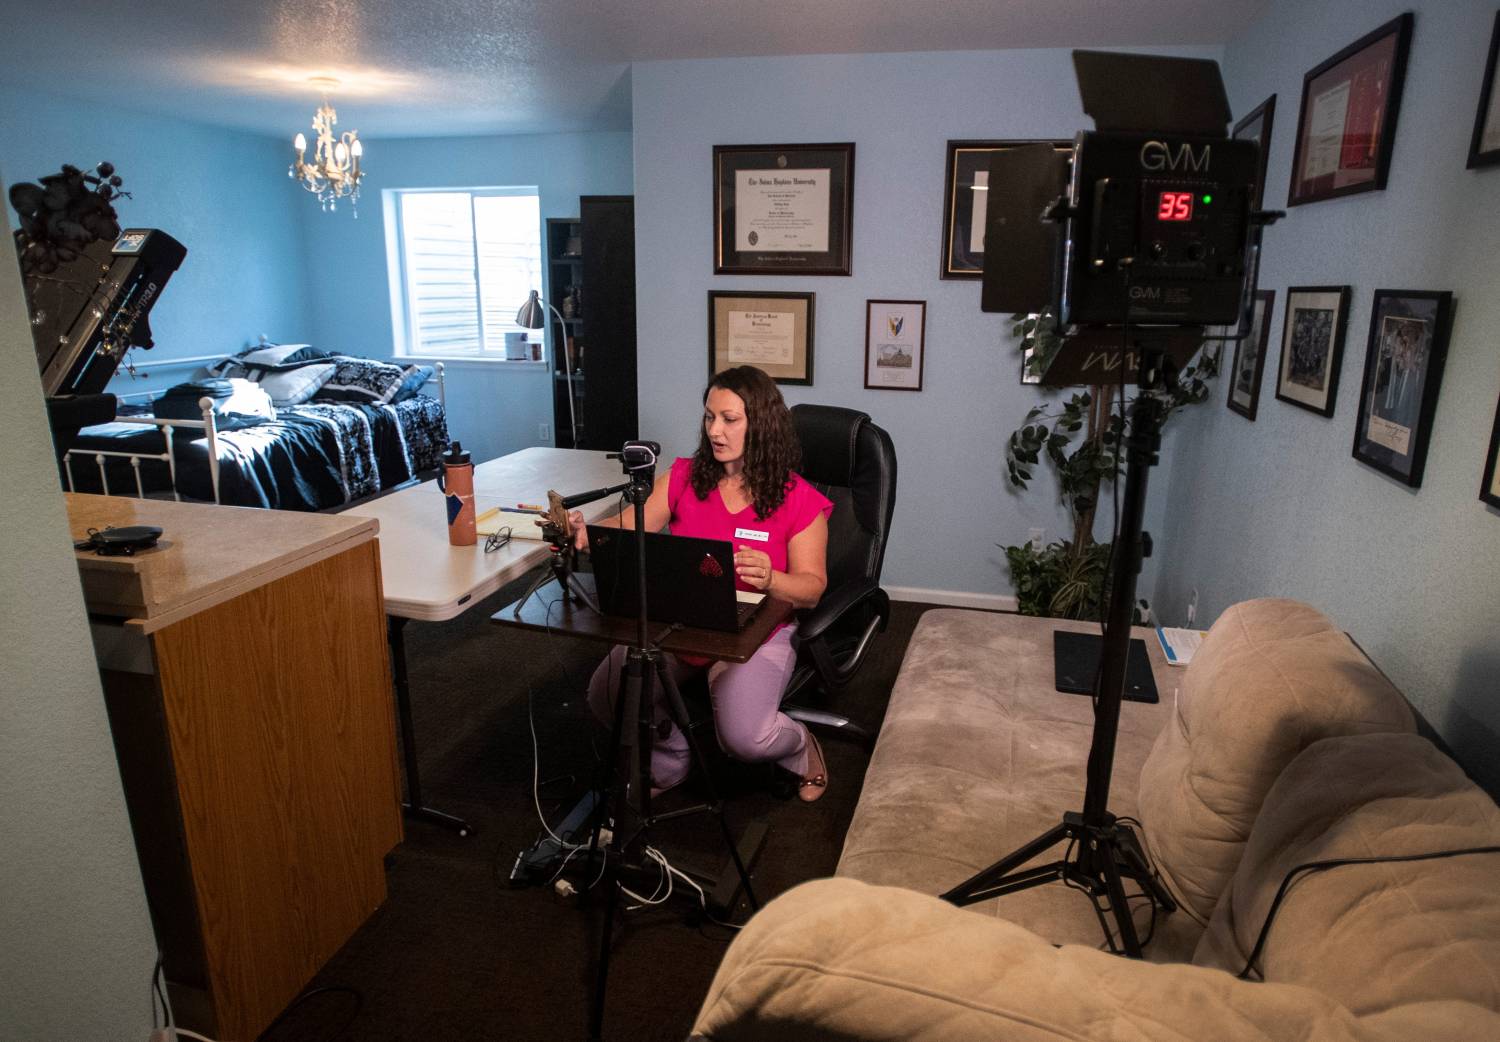 Dr. Tiffany Link gets ready to see a patient for a telehealth session in the spare bedroom in her home in Fort Collins, Colo. on Wednesday, May 20, 2020.052020 Telehealth 01 Bb